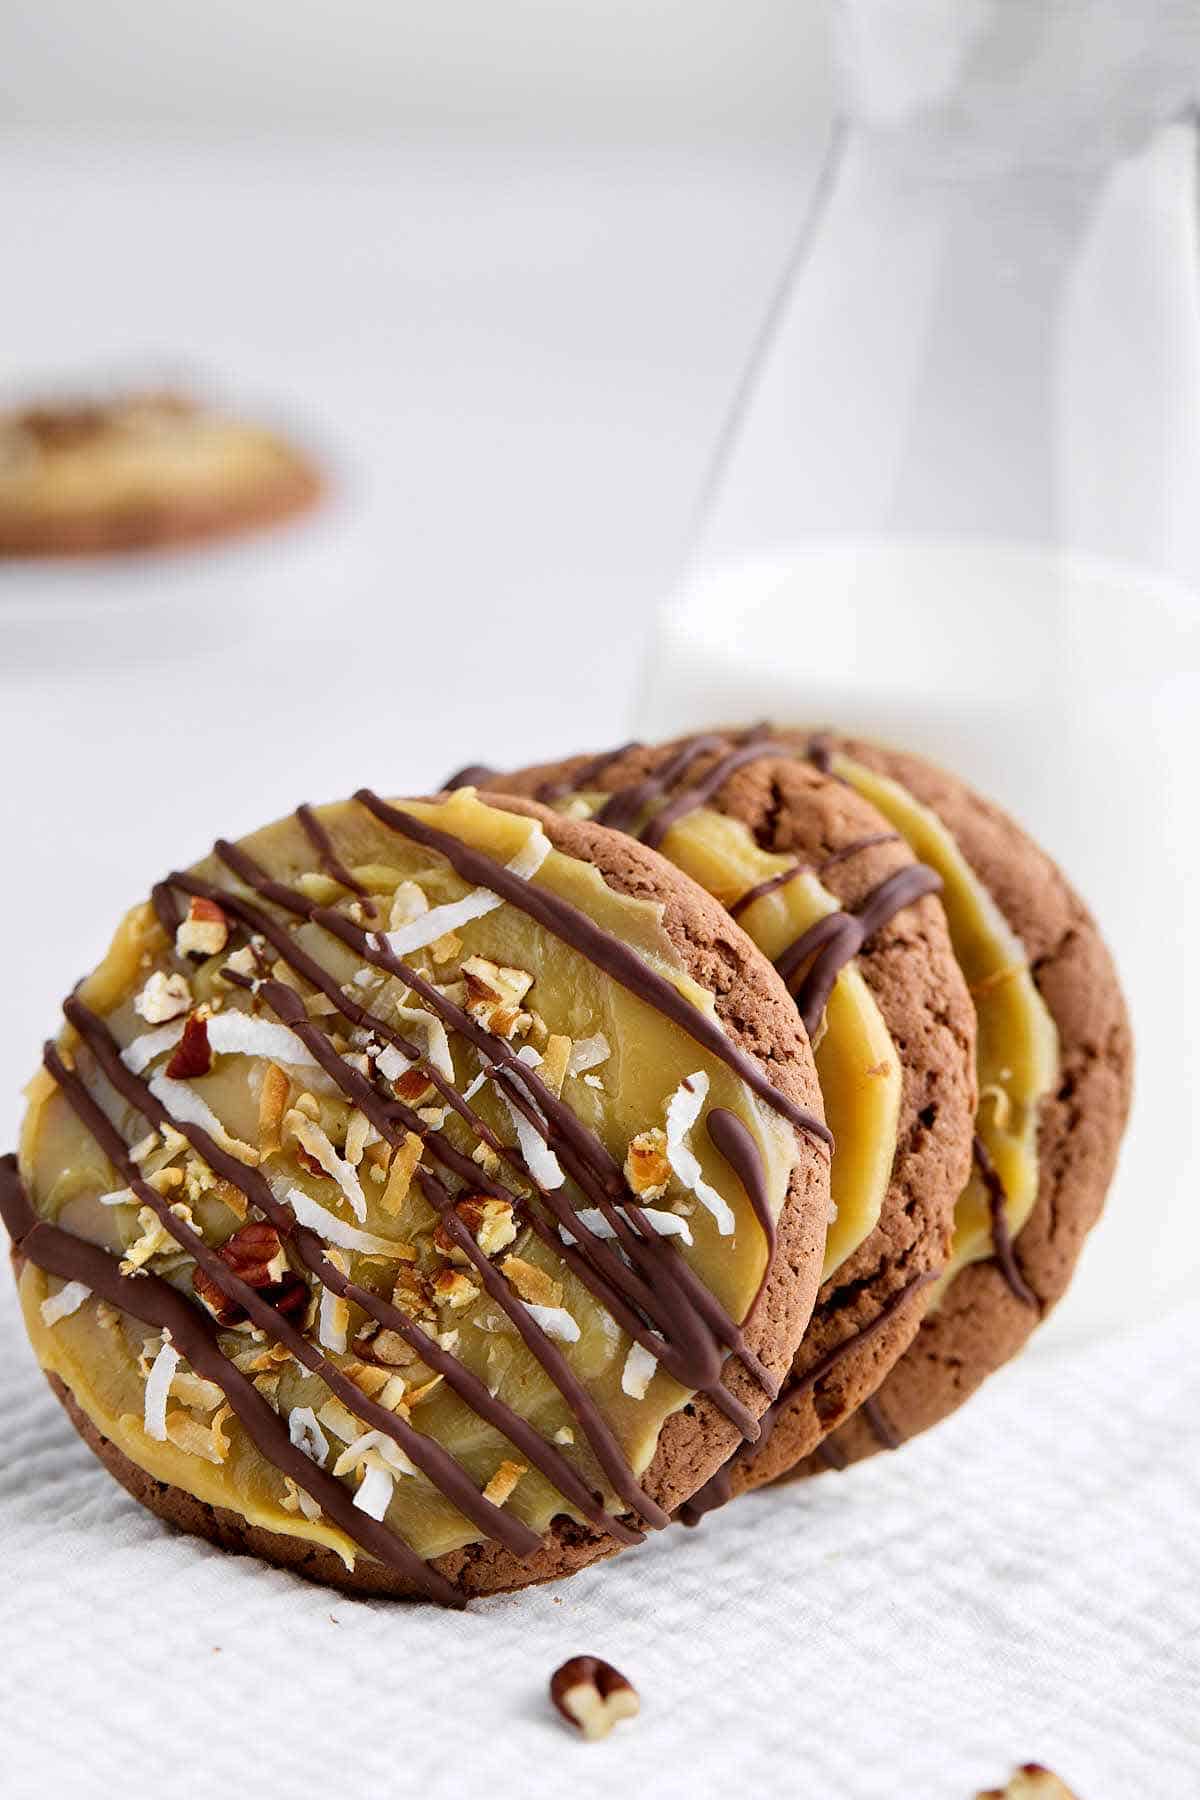 German chocolate cake mix cookies leaning against a glass of milk.